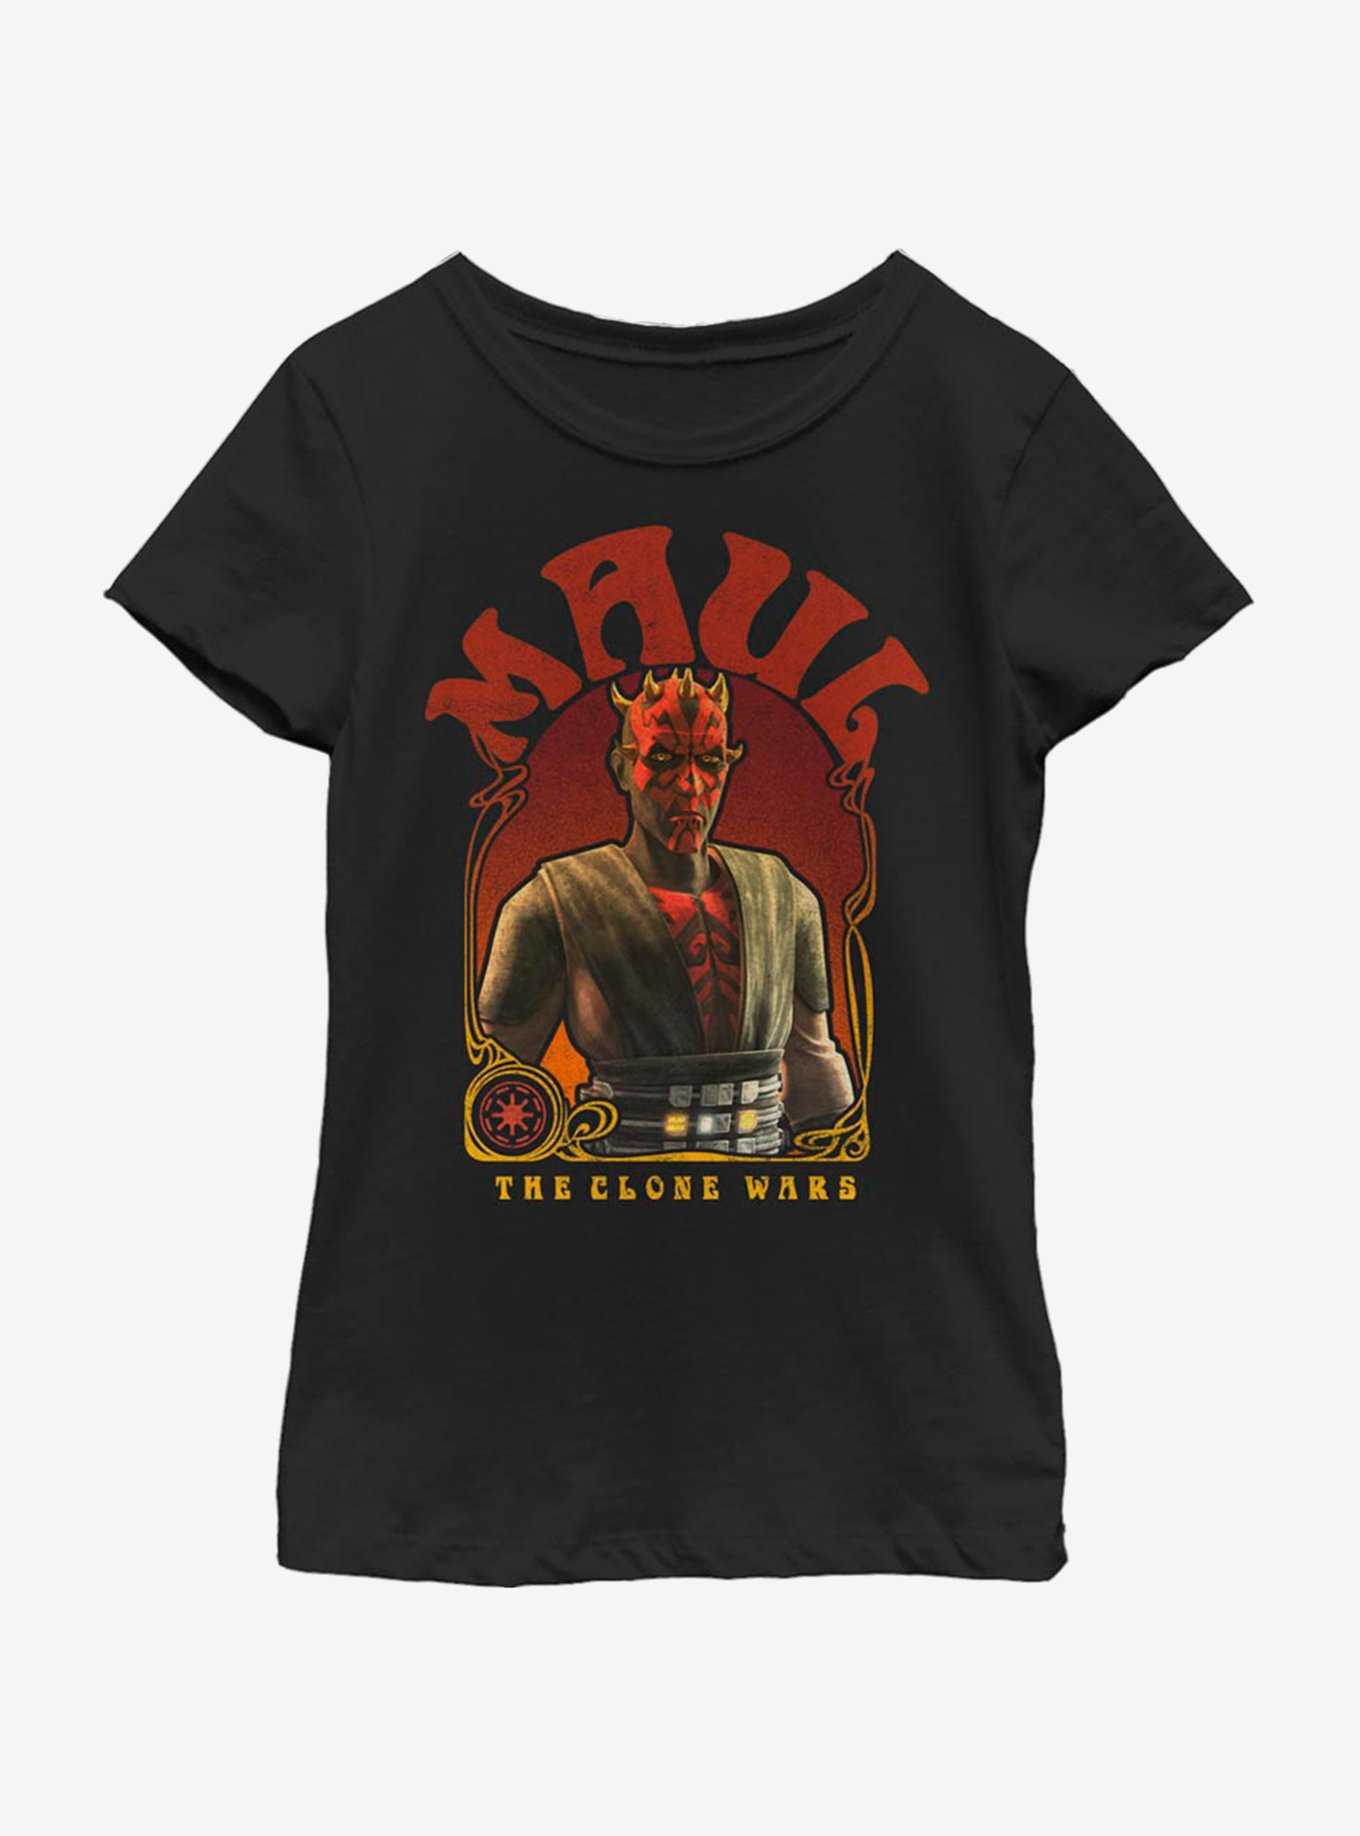 Star Wars: The Clone Wars Maul Nouveau Youth Girls T-Shirt, , hi-res